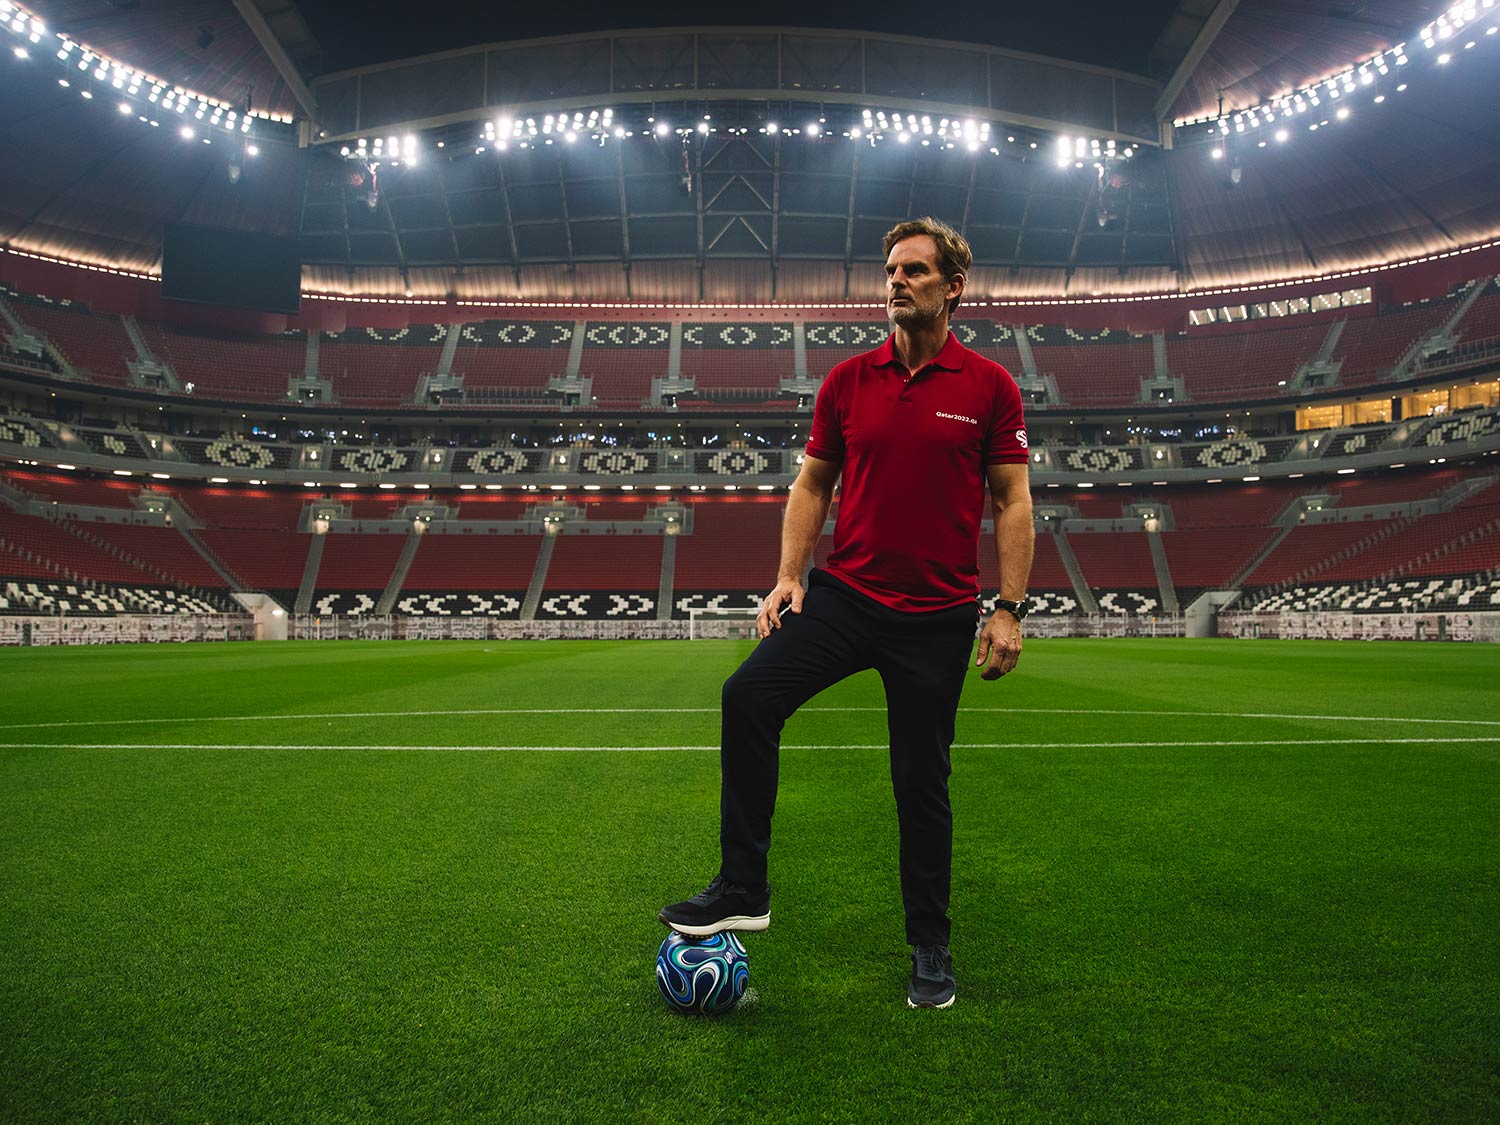 Ronald de Boer: I wish I was still playing, so I could experience Qatar 2022